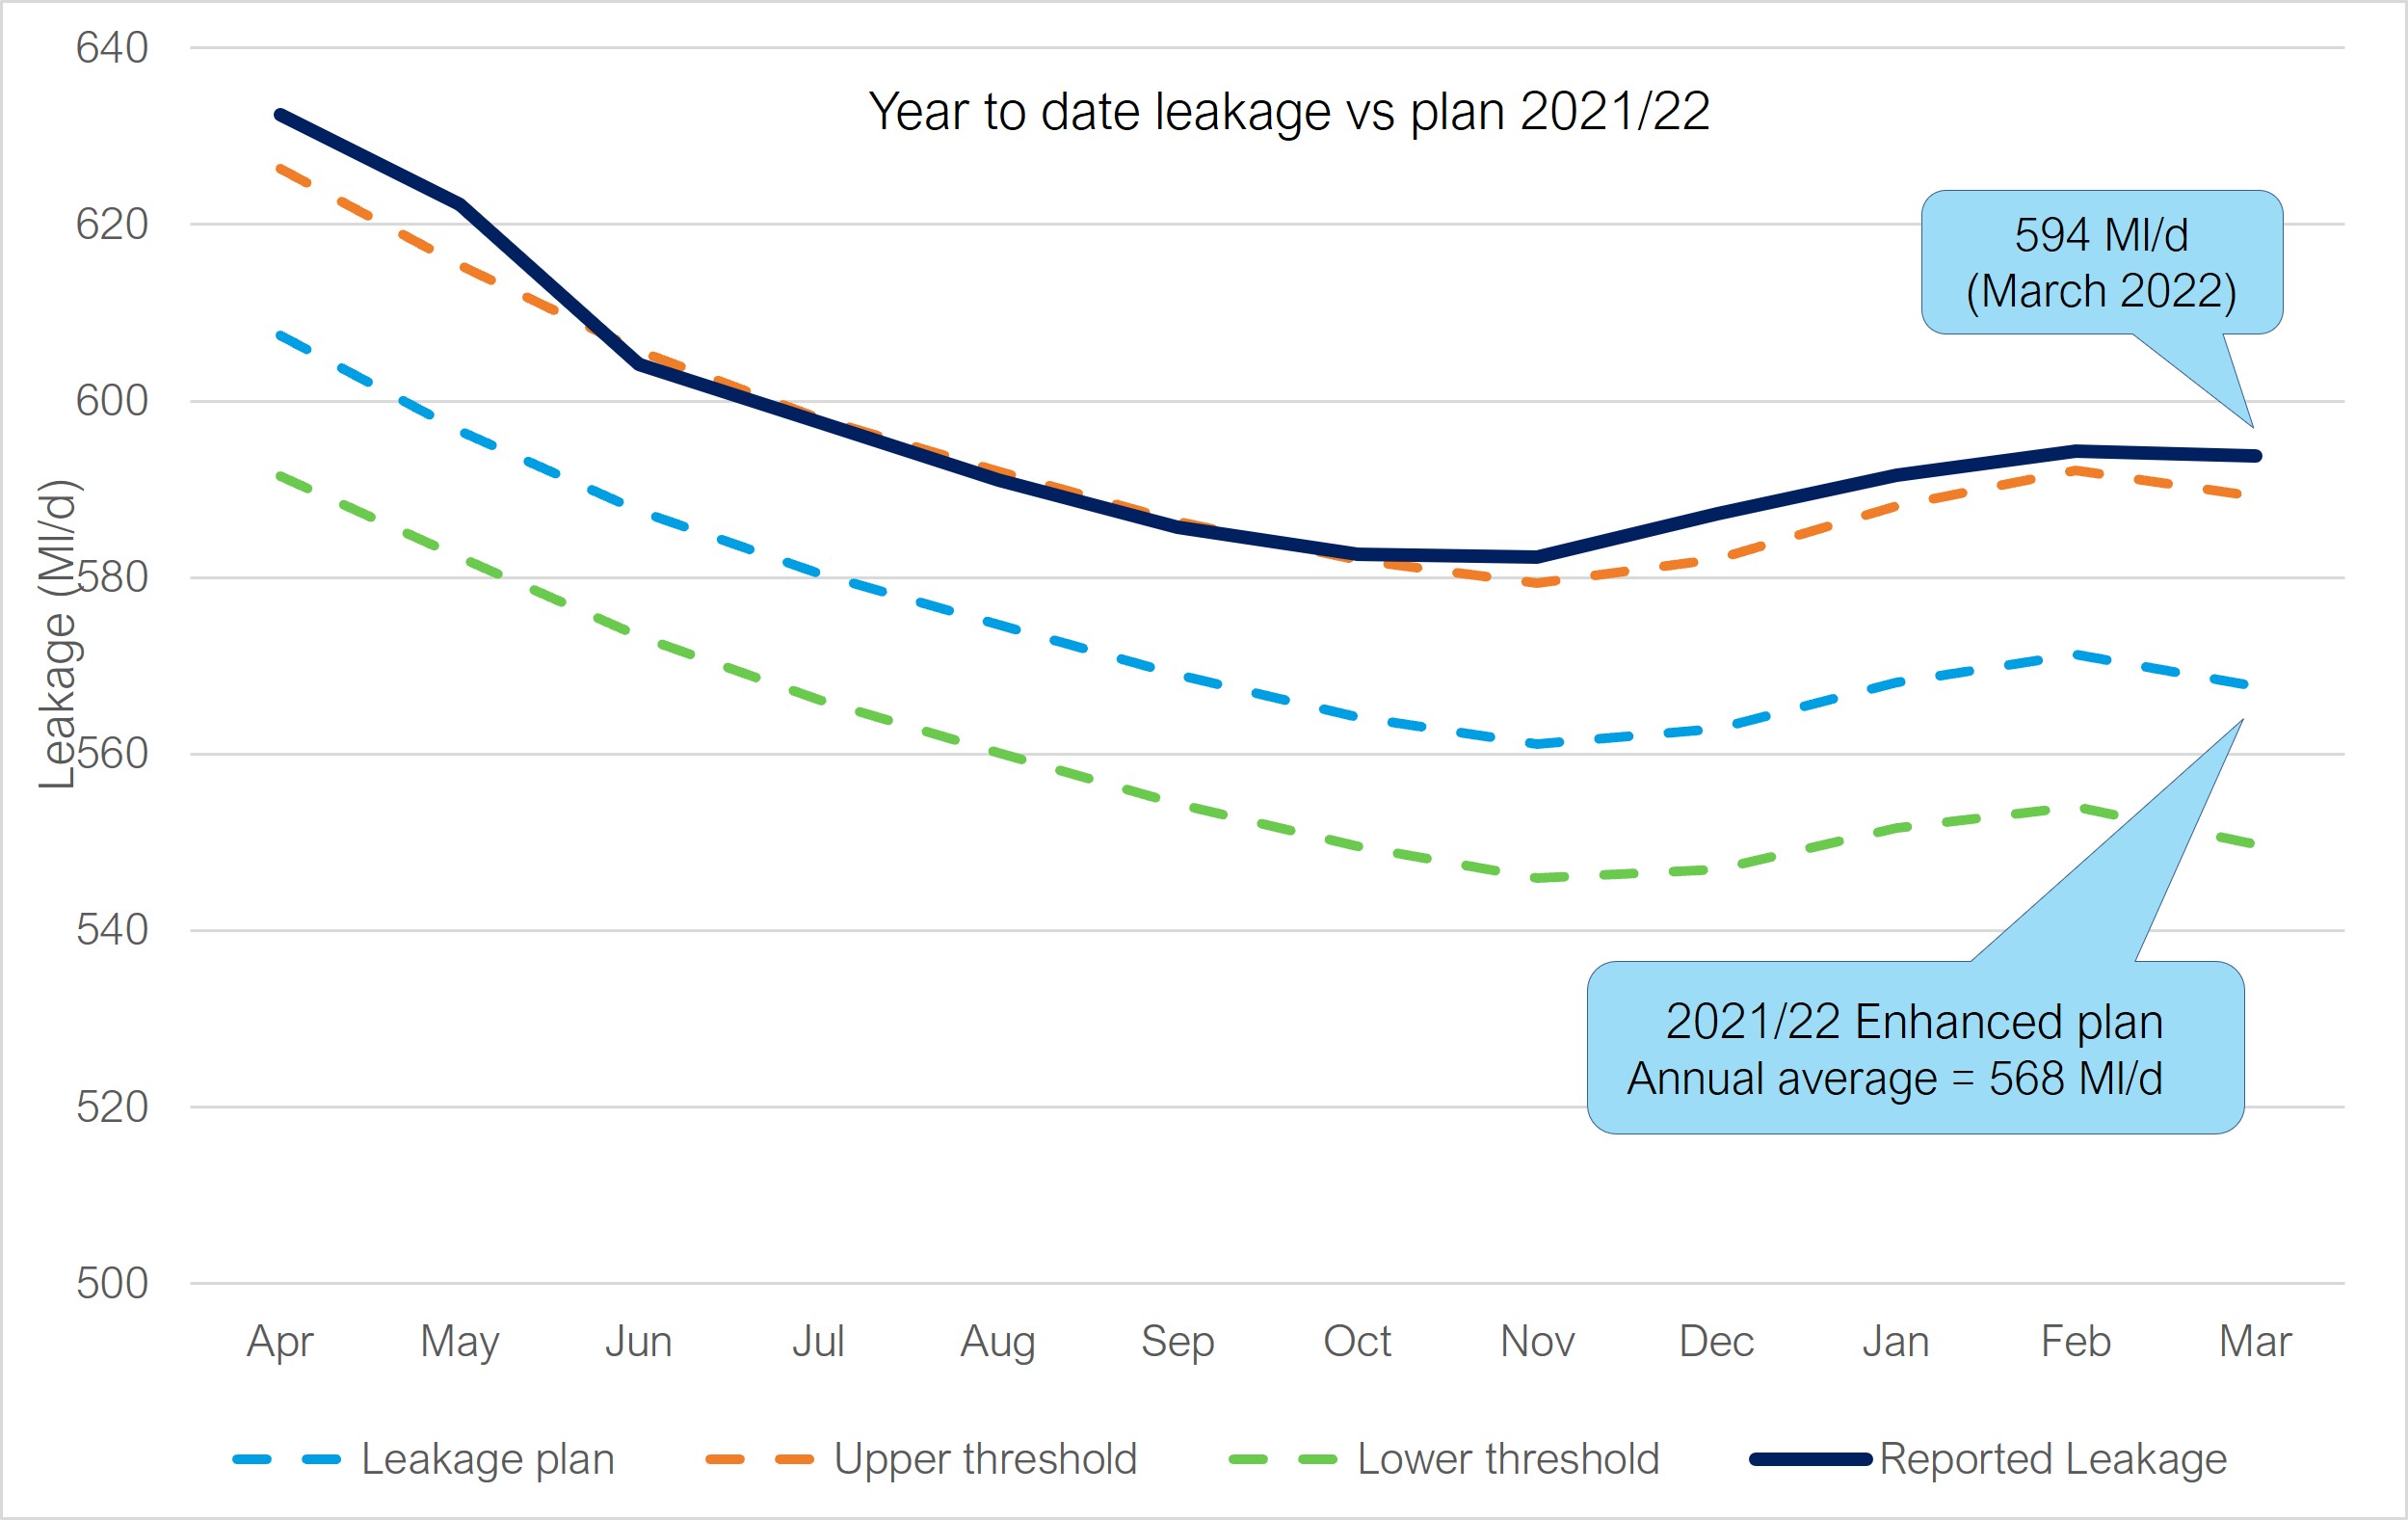 A graph showing the average monthly leakage against our plan